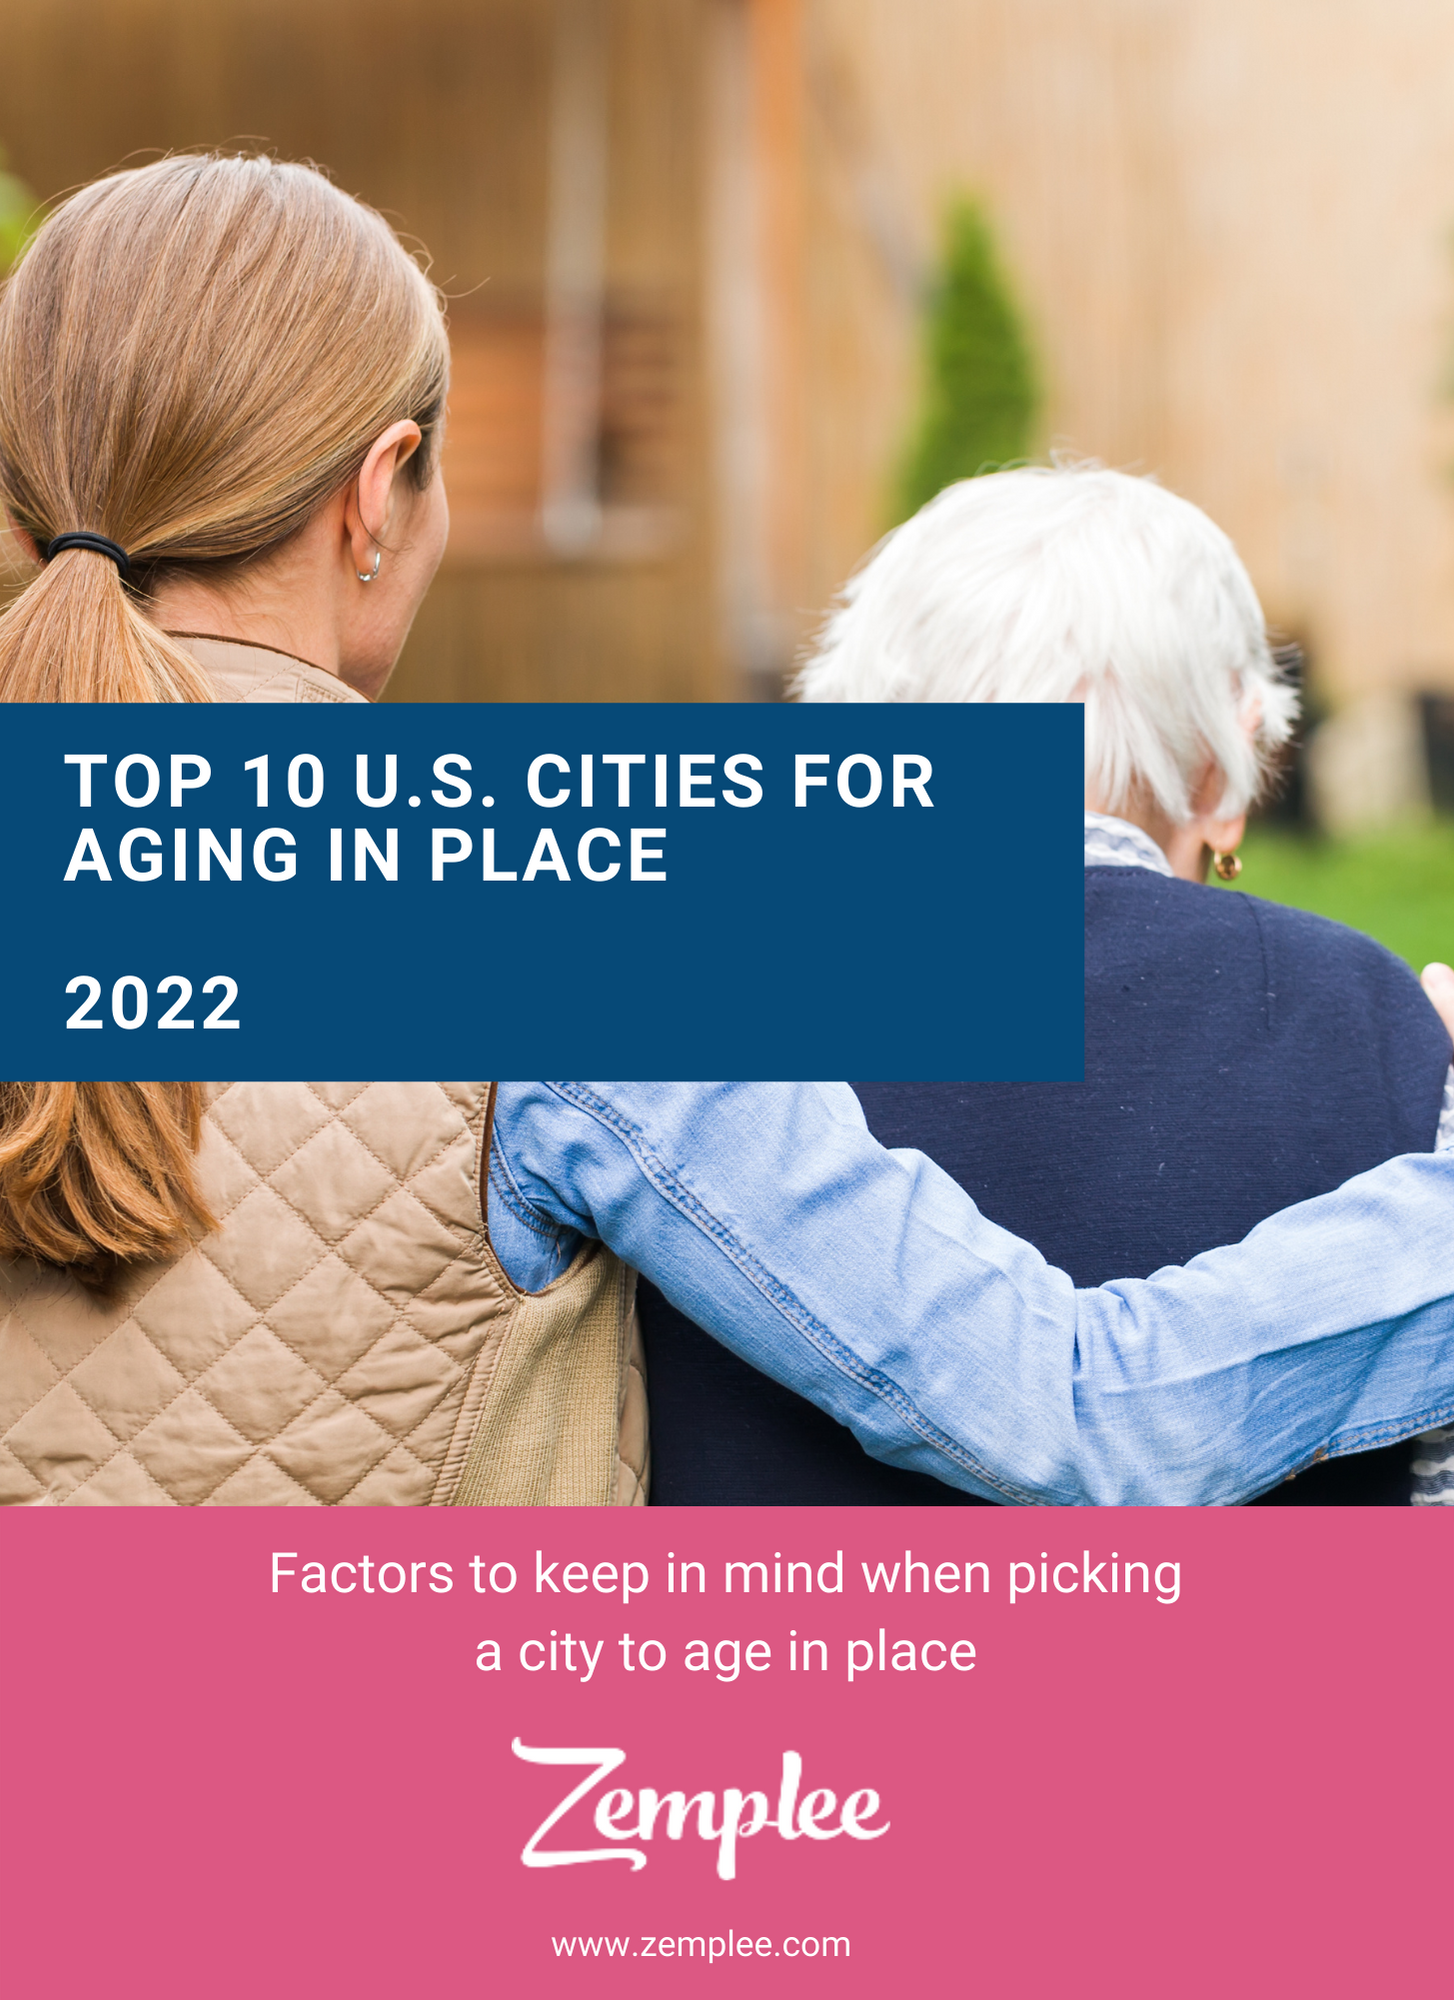 Zemplee Top 10 Cities to Age in Place